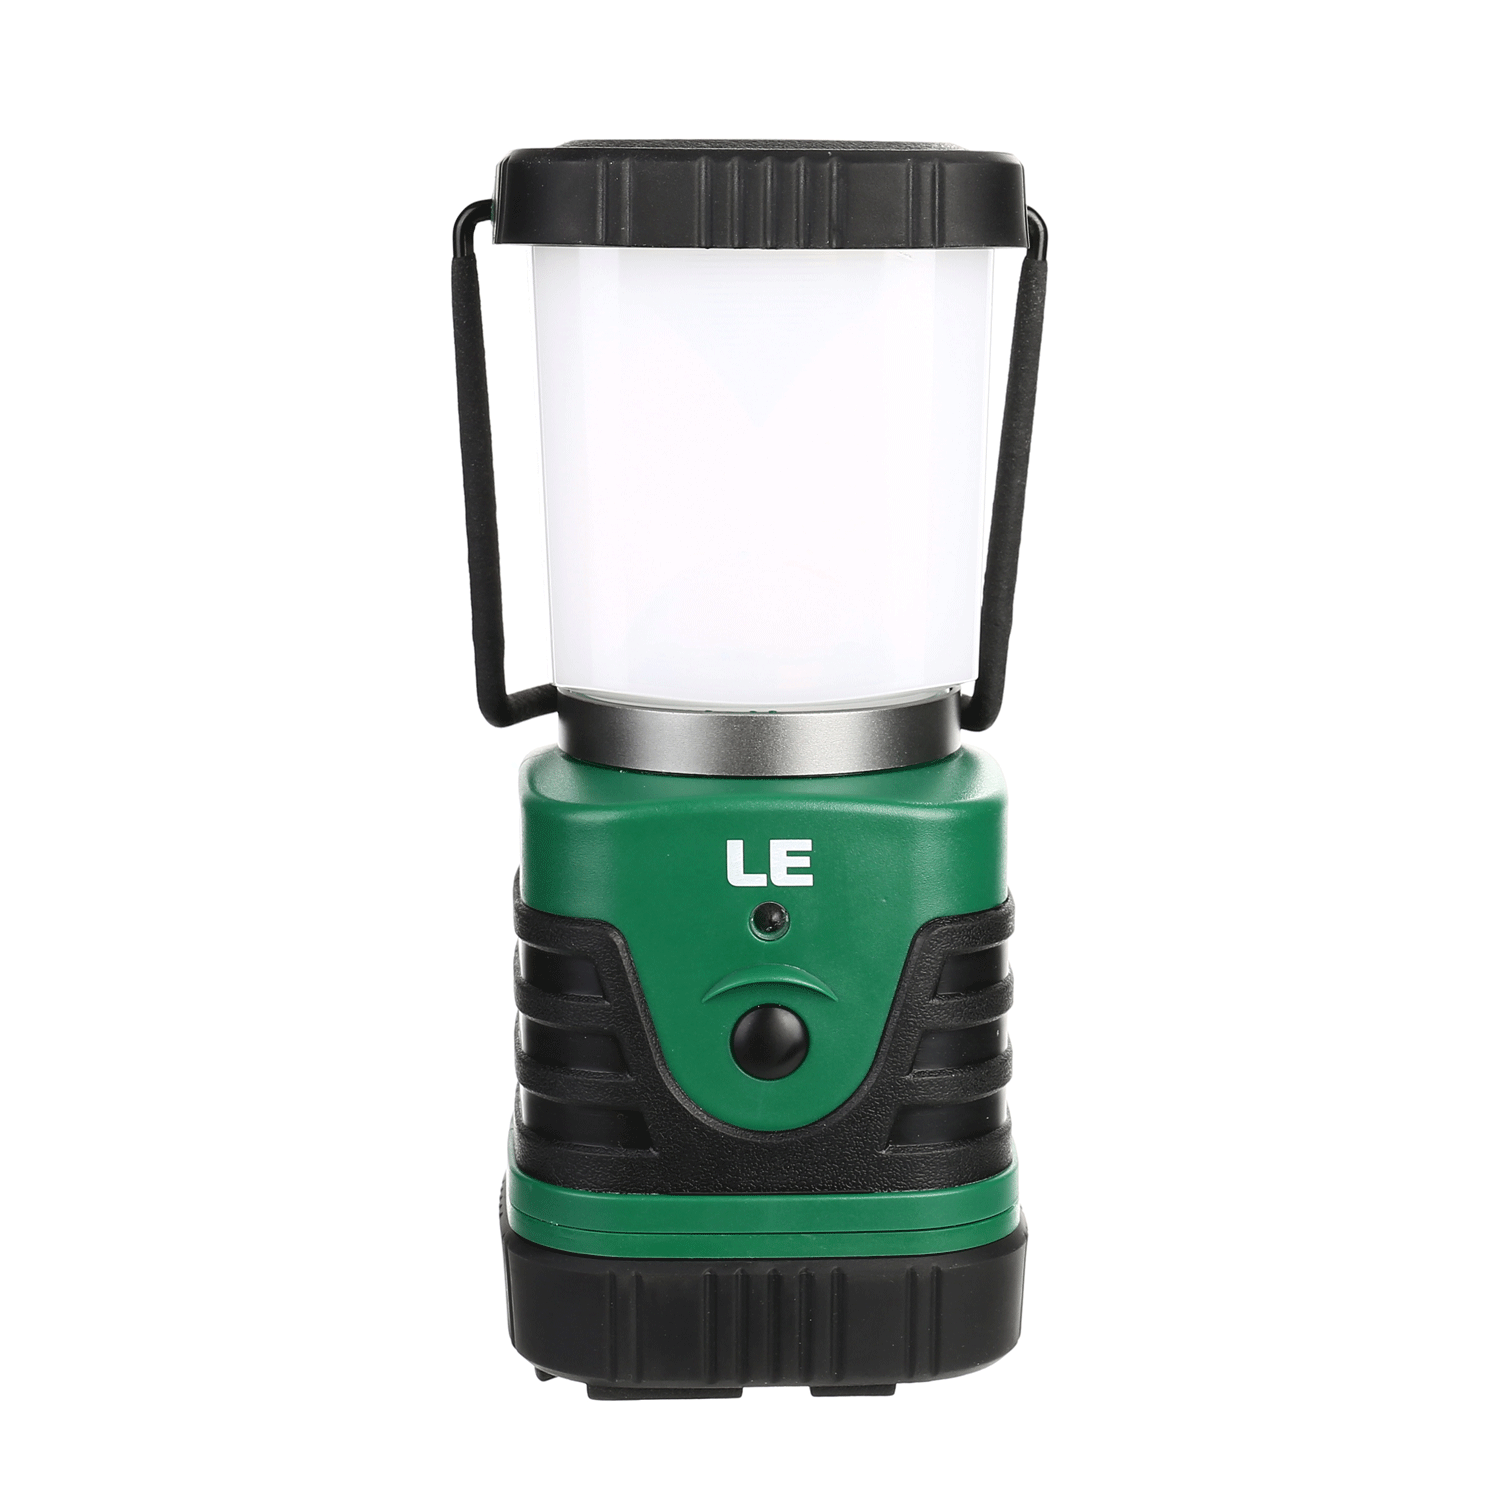 Camping Lantern Rechargeable, Lantern Flashlight LED with 800LM,6Light  Modes,3800mAh Power Bank, IPX4 Waterproof,Perfect for Camping Light  Hurricane,Emergency,Hiking,Outdoor,USB Cable Included